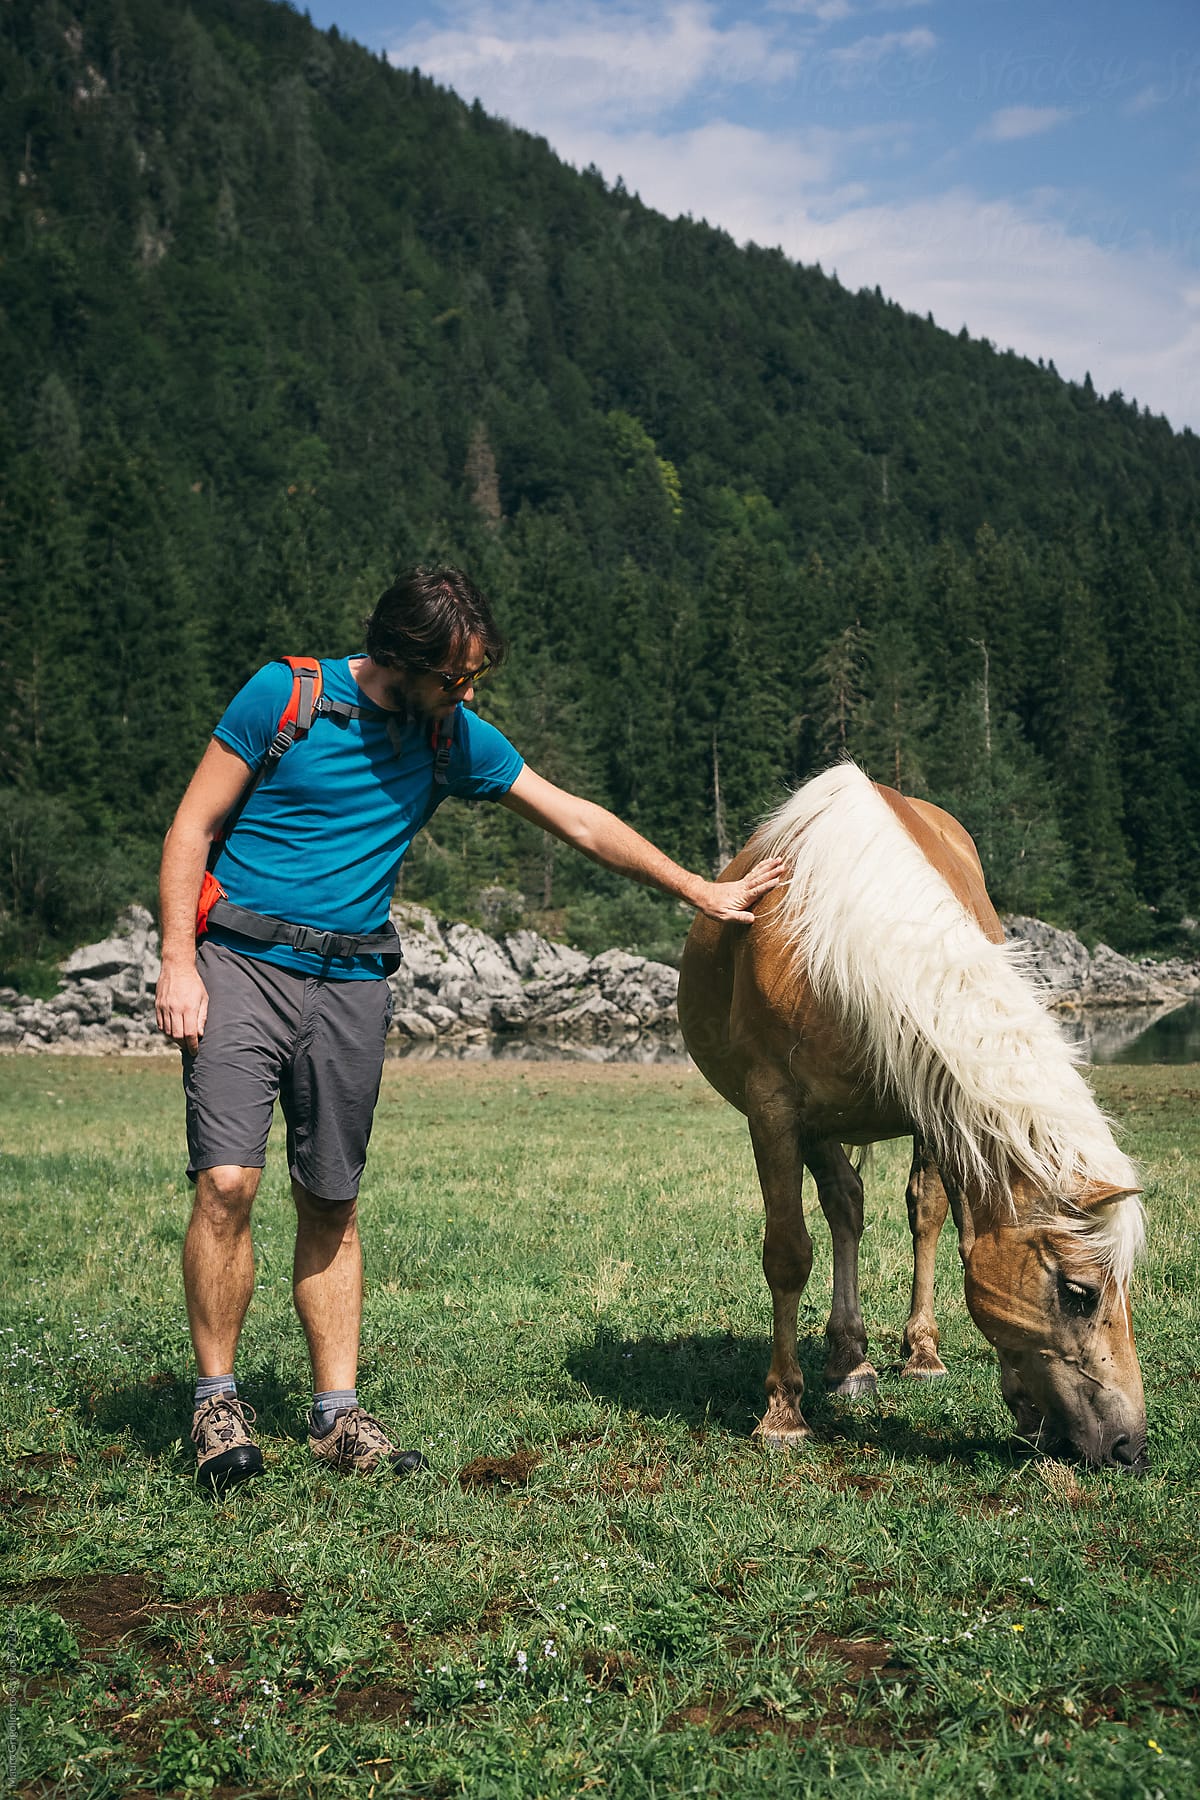 Man encountering a horse on a walk in nature